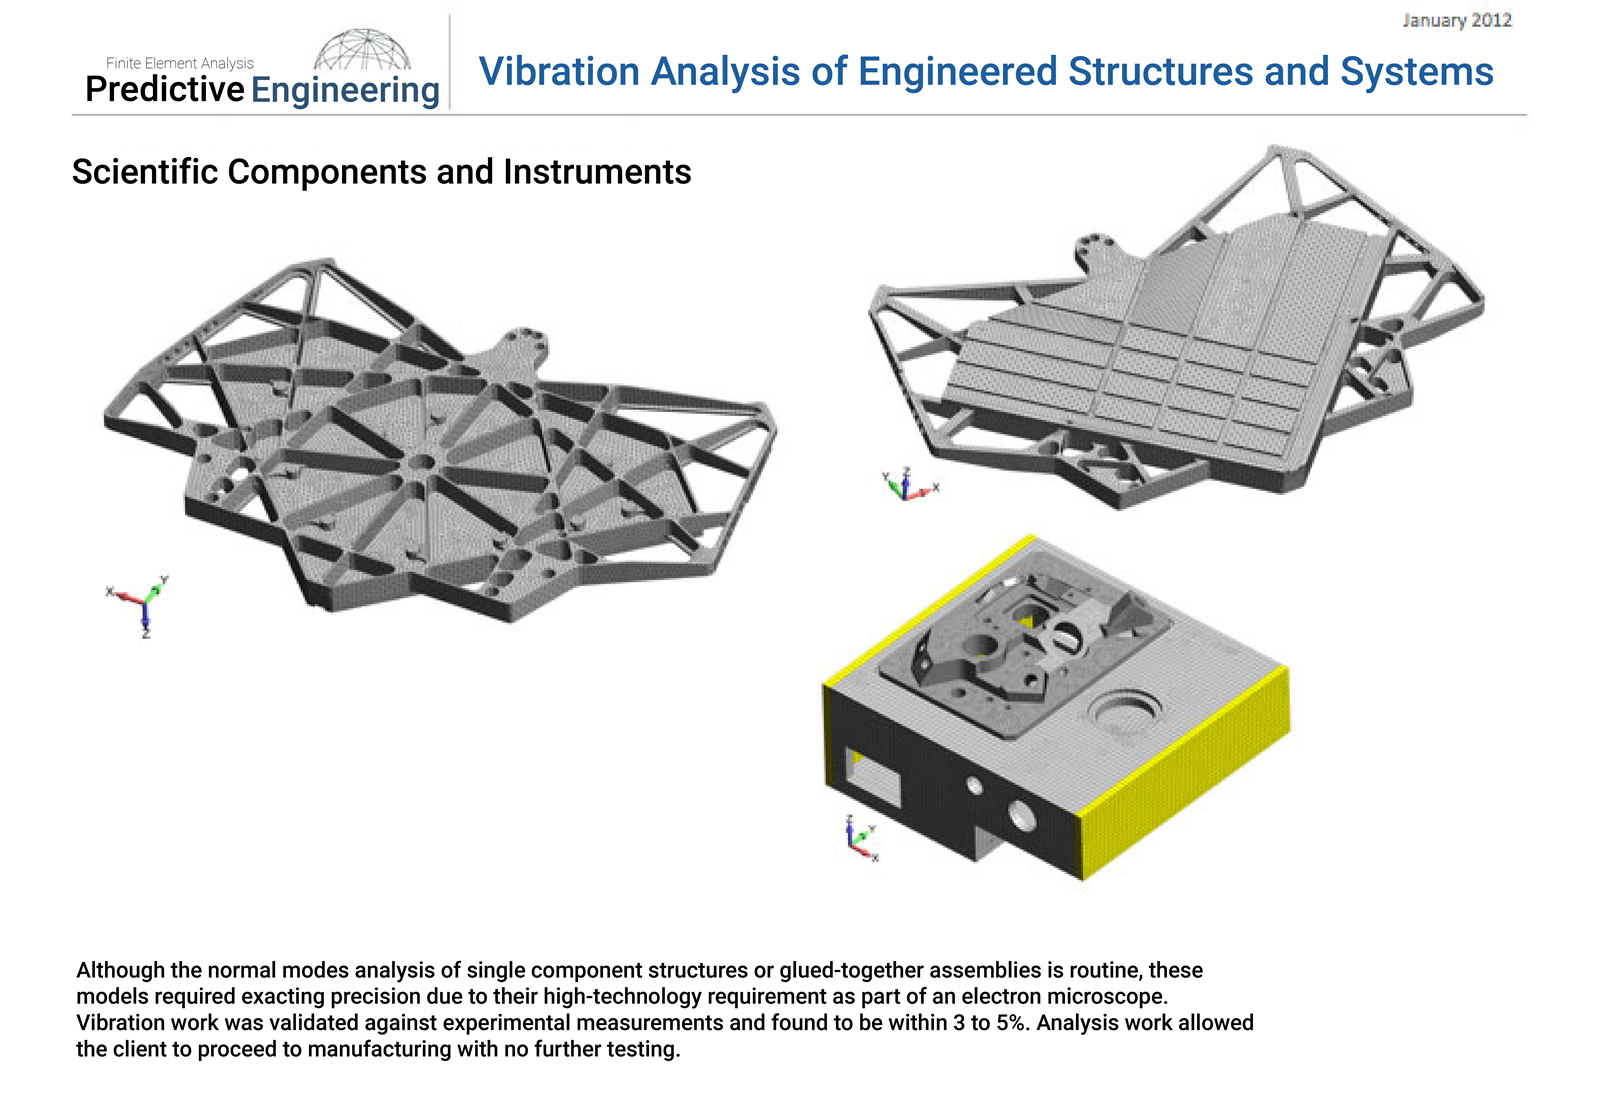 Normal modes analysis using Femap and NX Nastran for a variety of electron microscope platens and holders